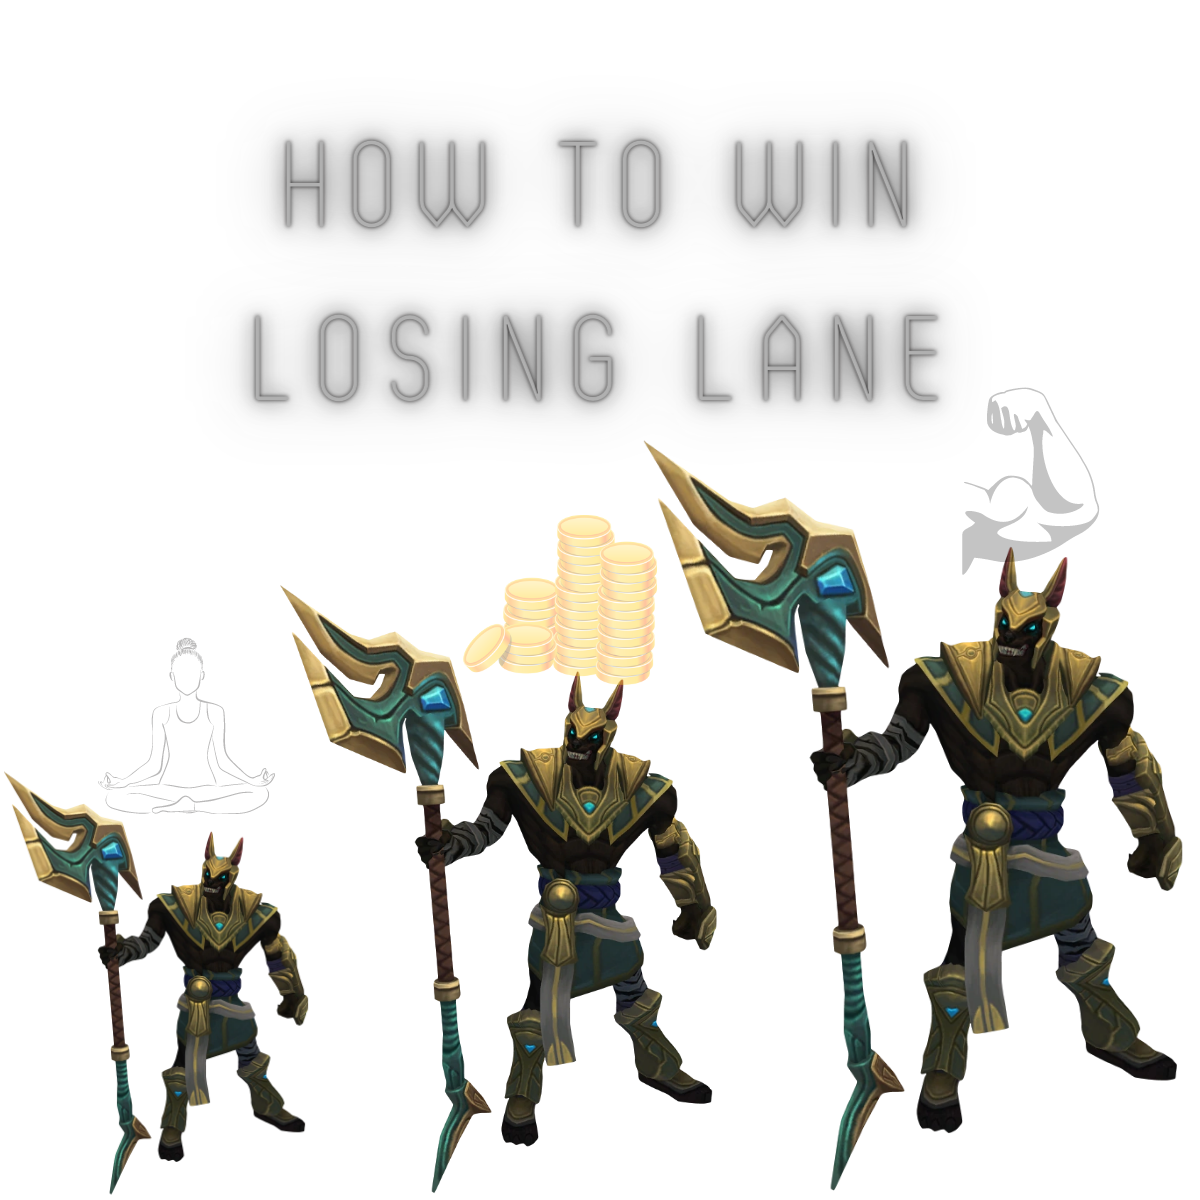 How To Stop Feeding After Losing Lane